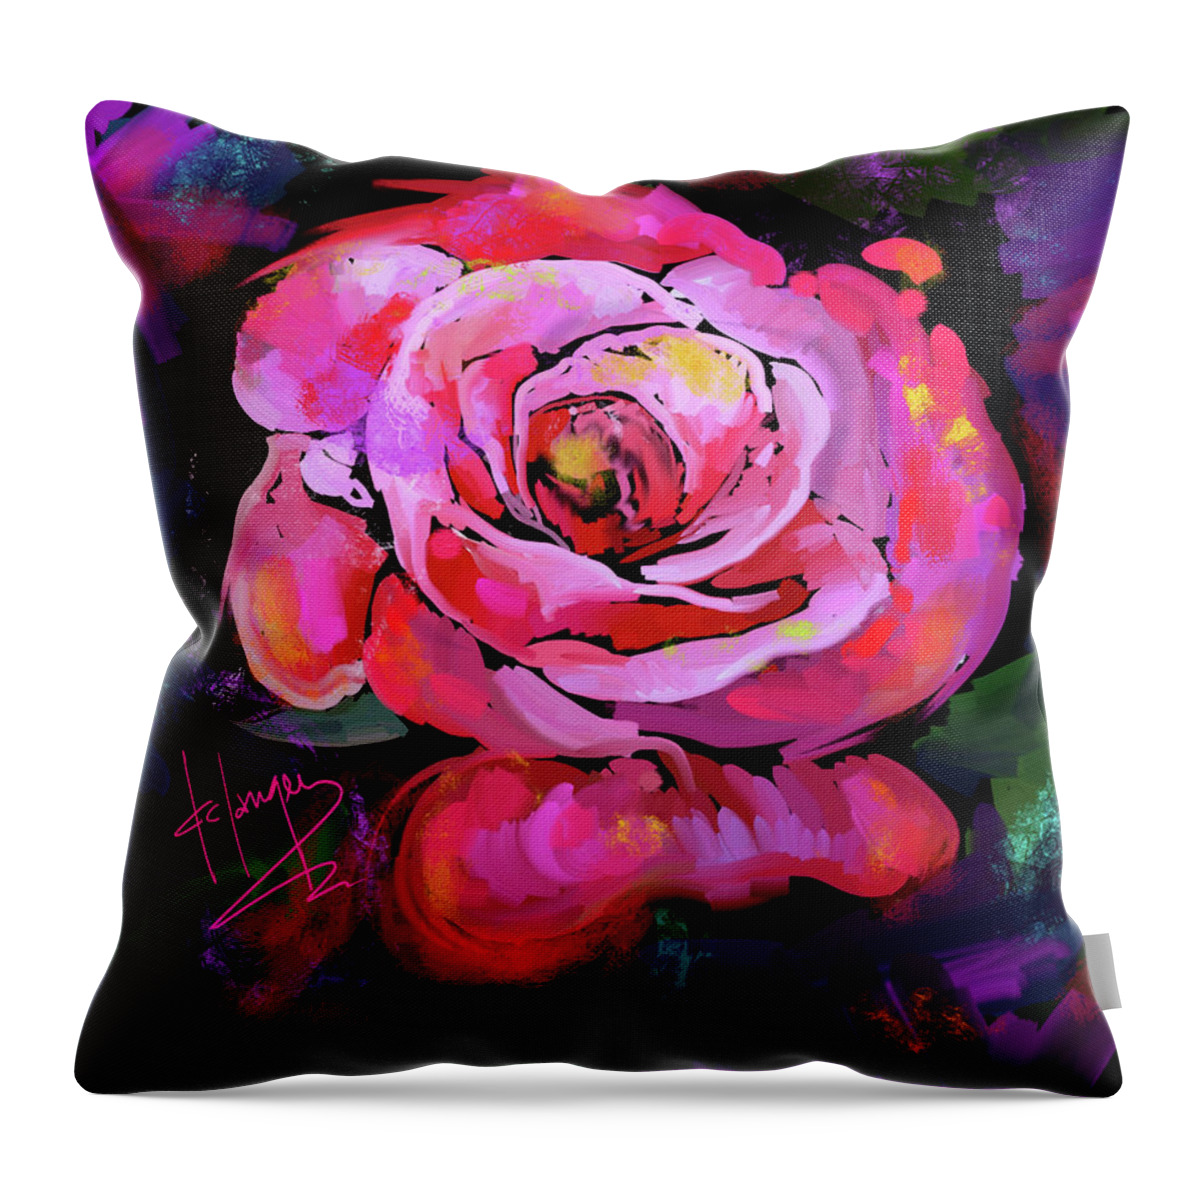 Pink- Red Throw Pillow featuring the painting Pink-Red Rose by DC Langer